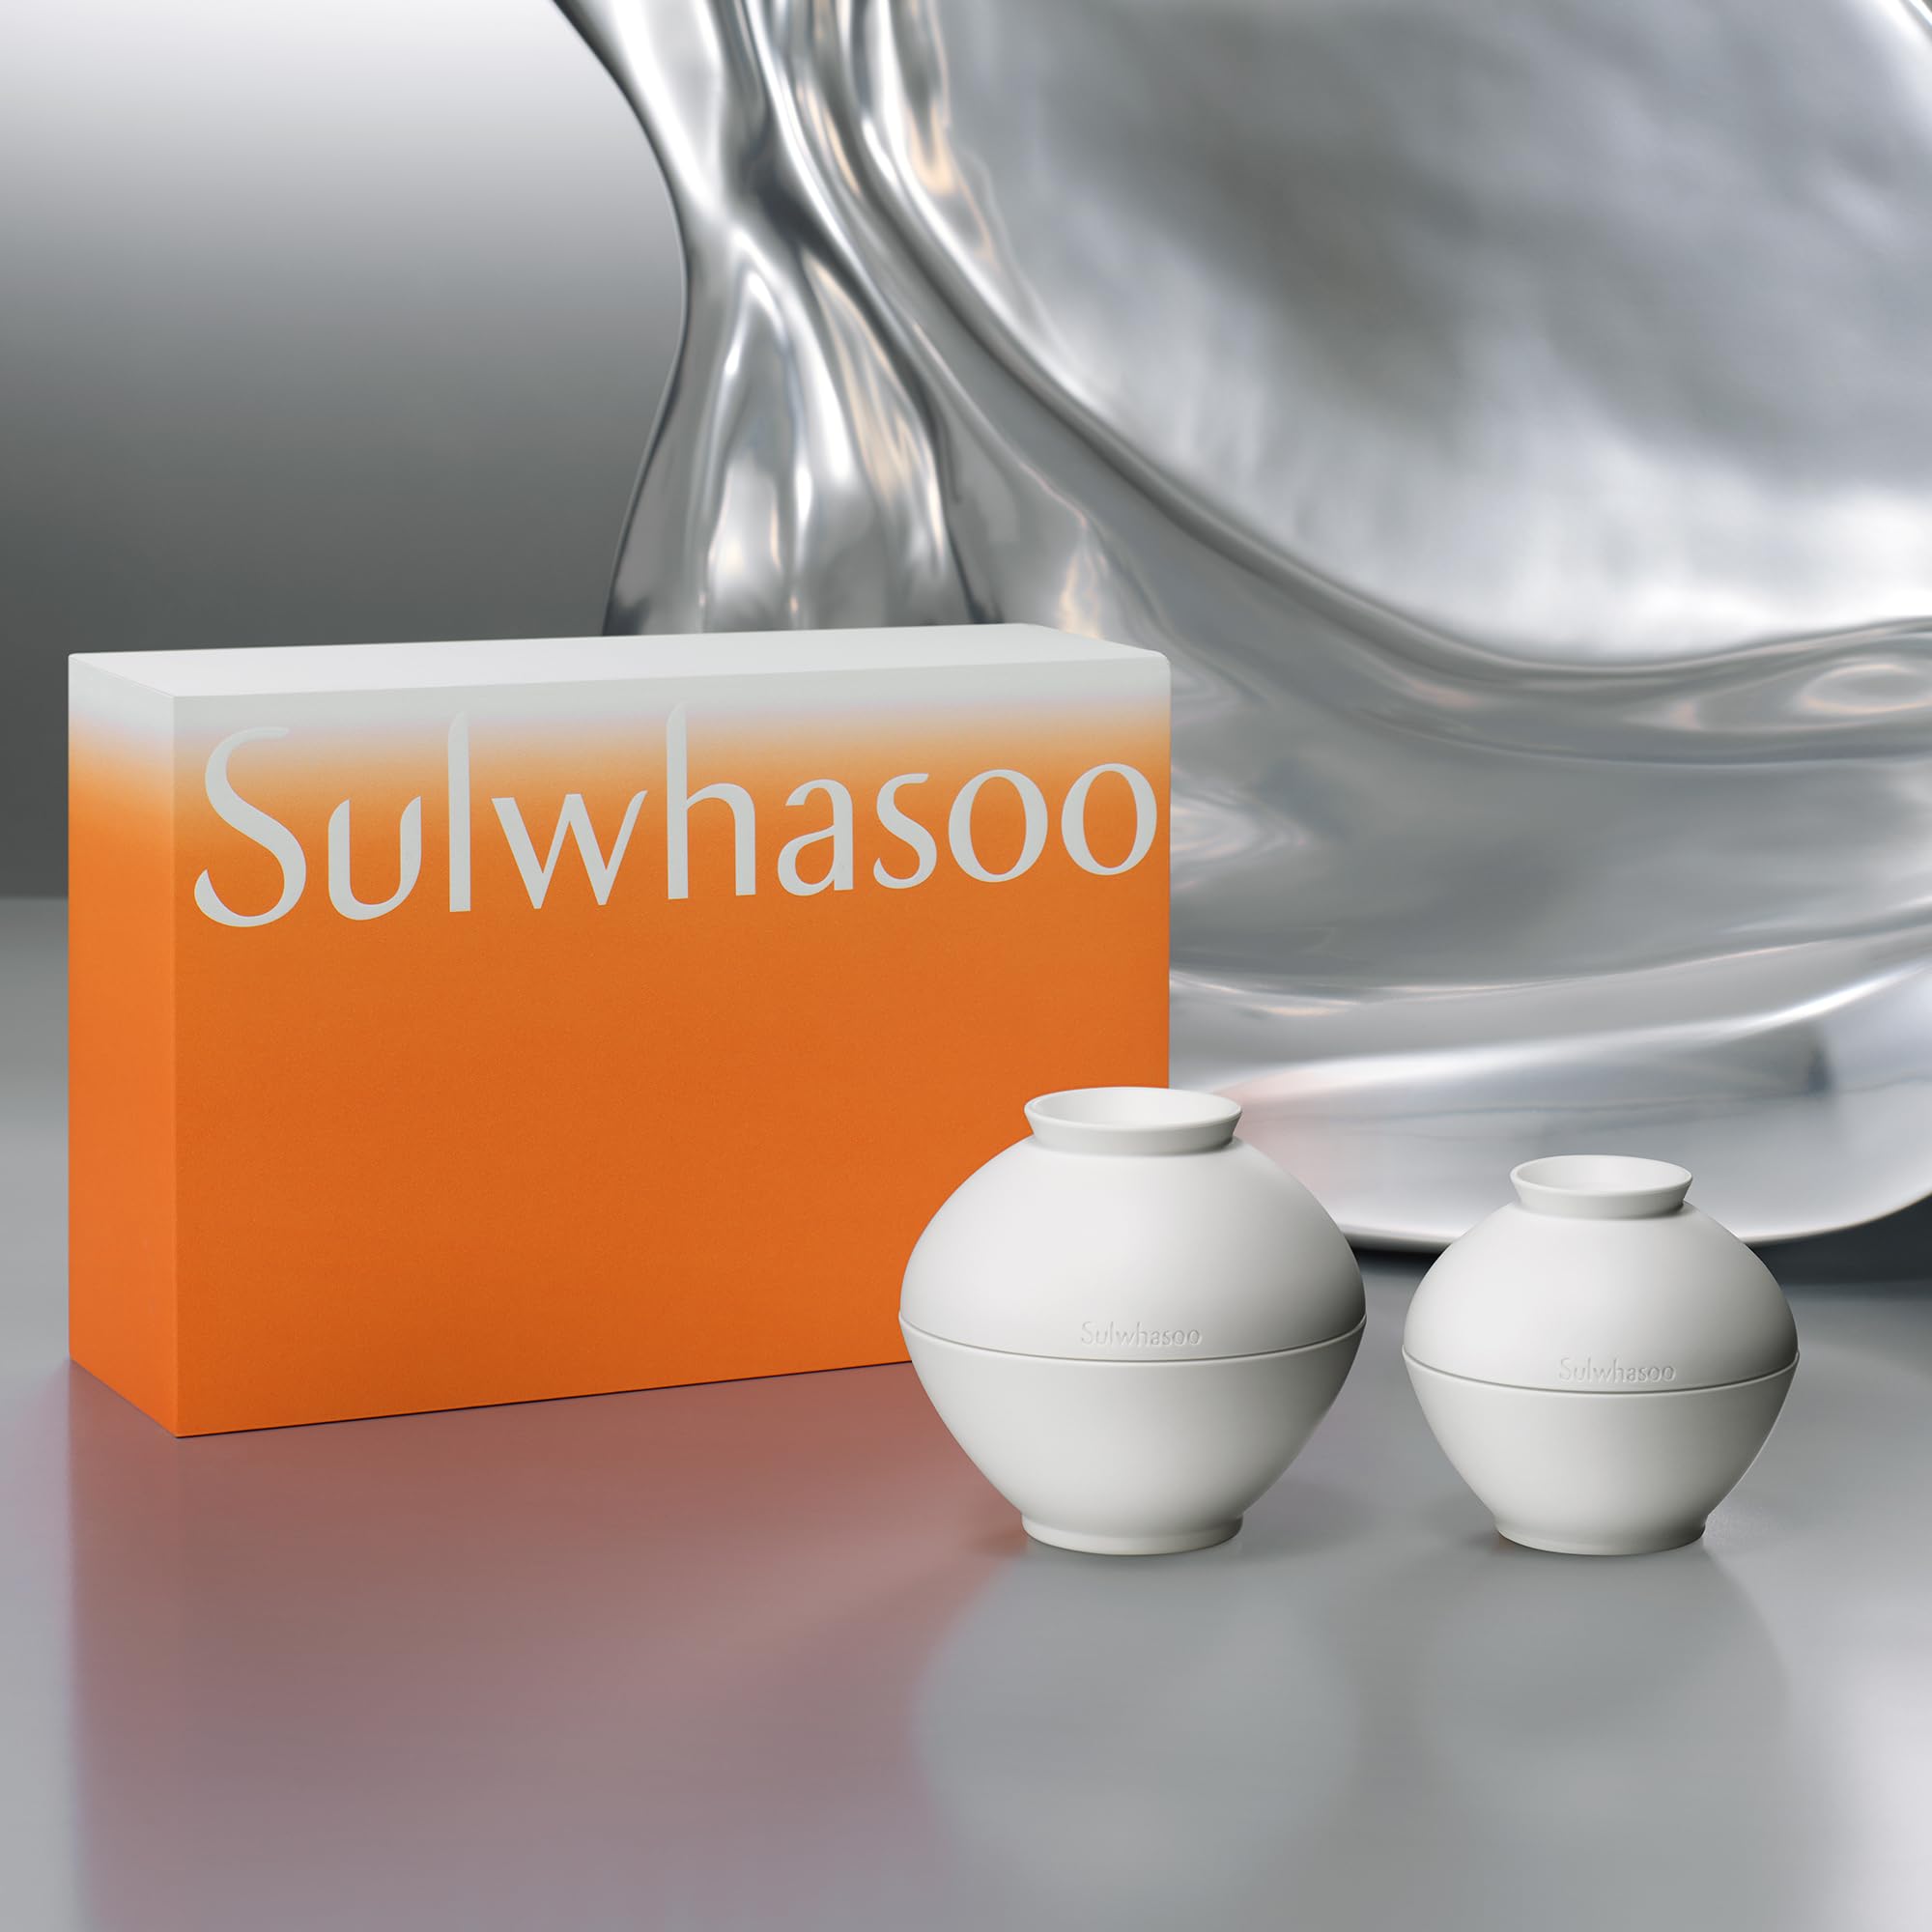 Sulwhasoo Ultimate S Cream: Hydrates, Visibly Firm, Anti-aging, Vitality, Ginseng Berry